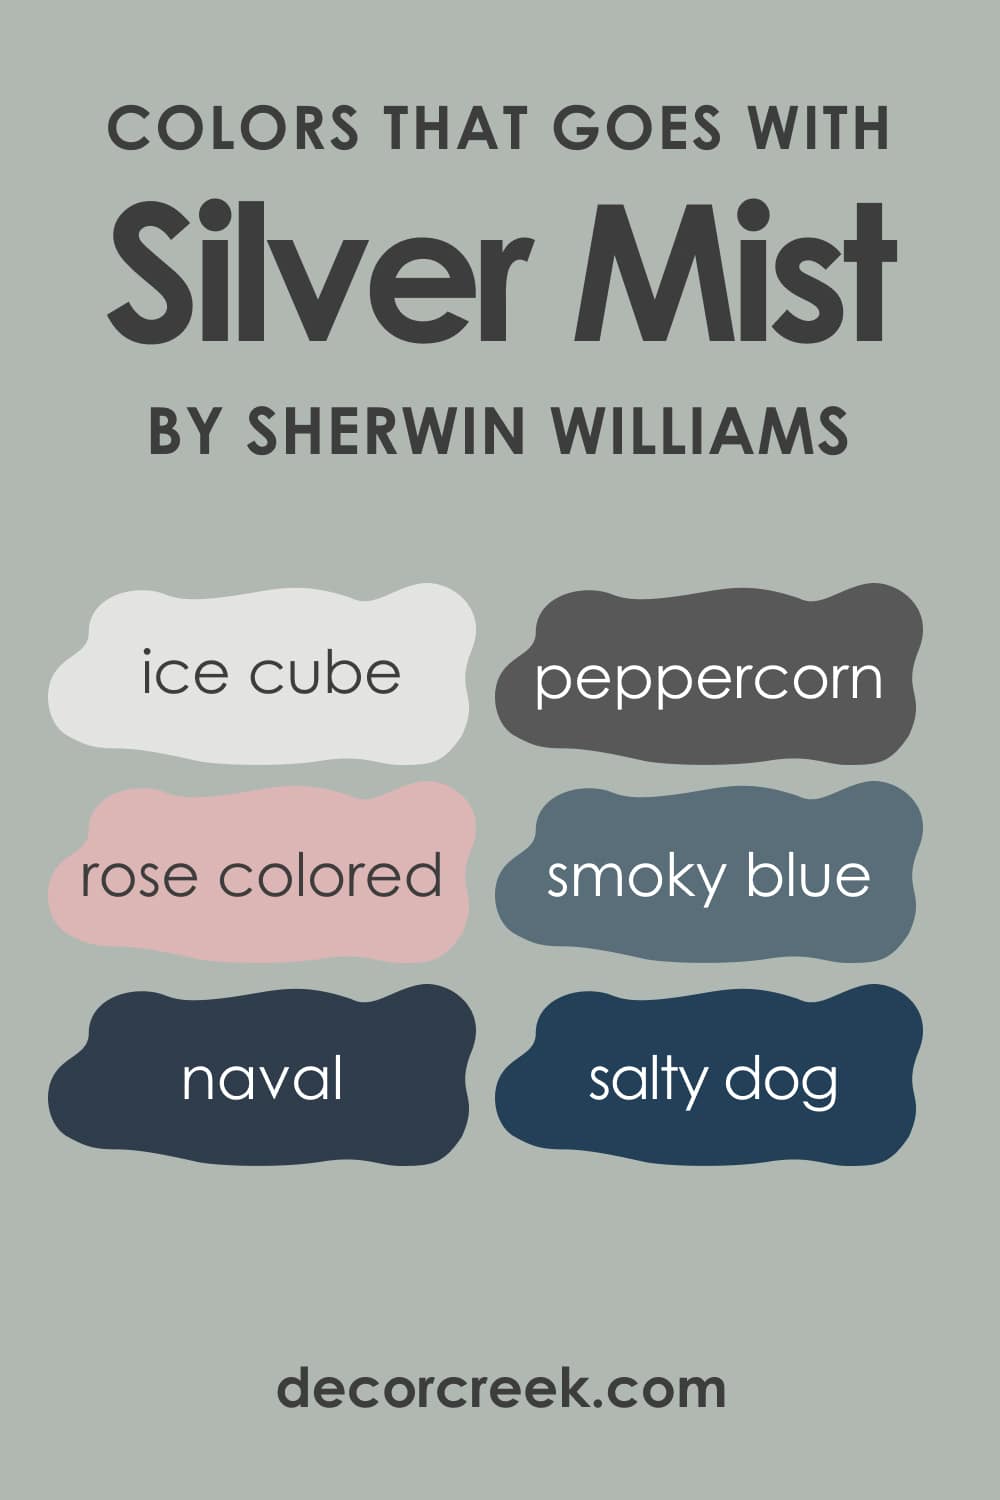 Colors That Go With Silver Mist SW-7621